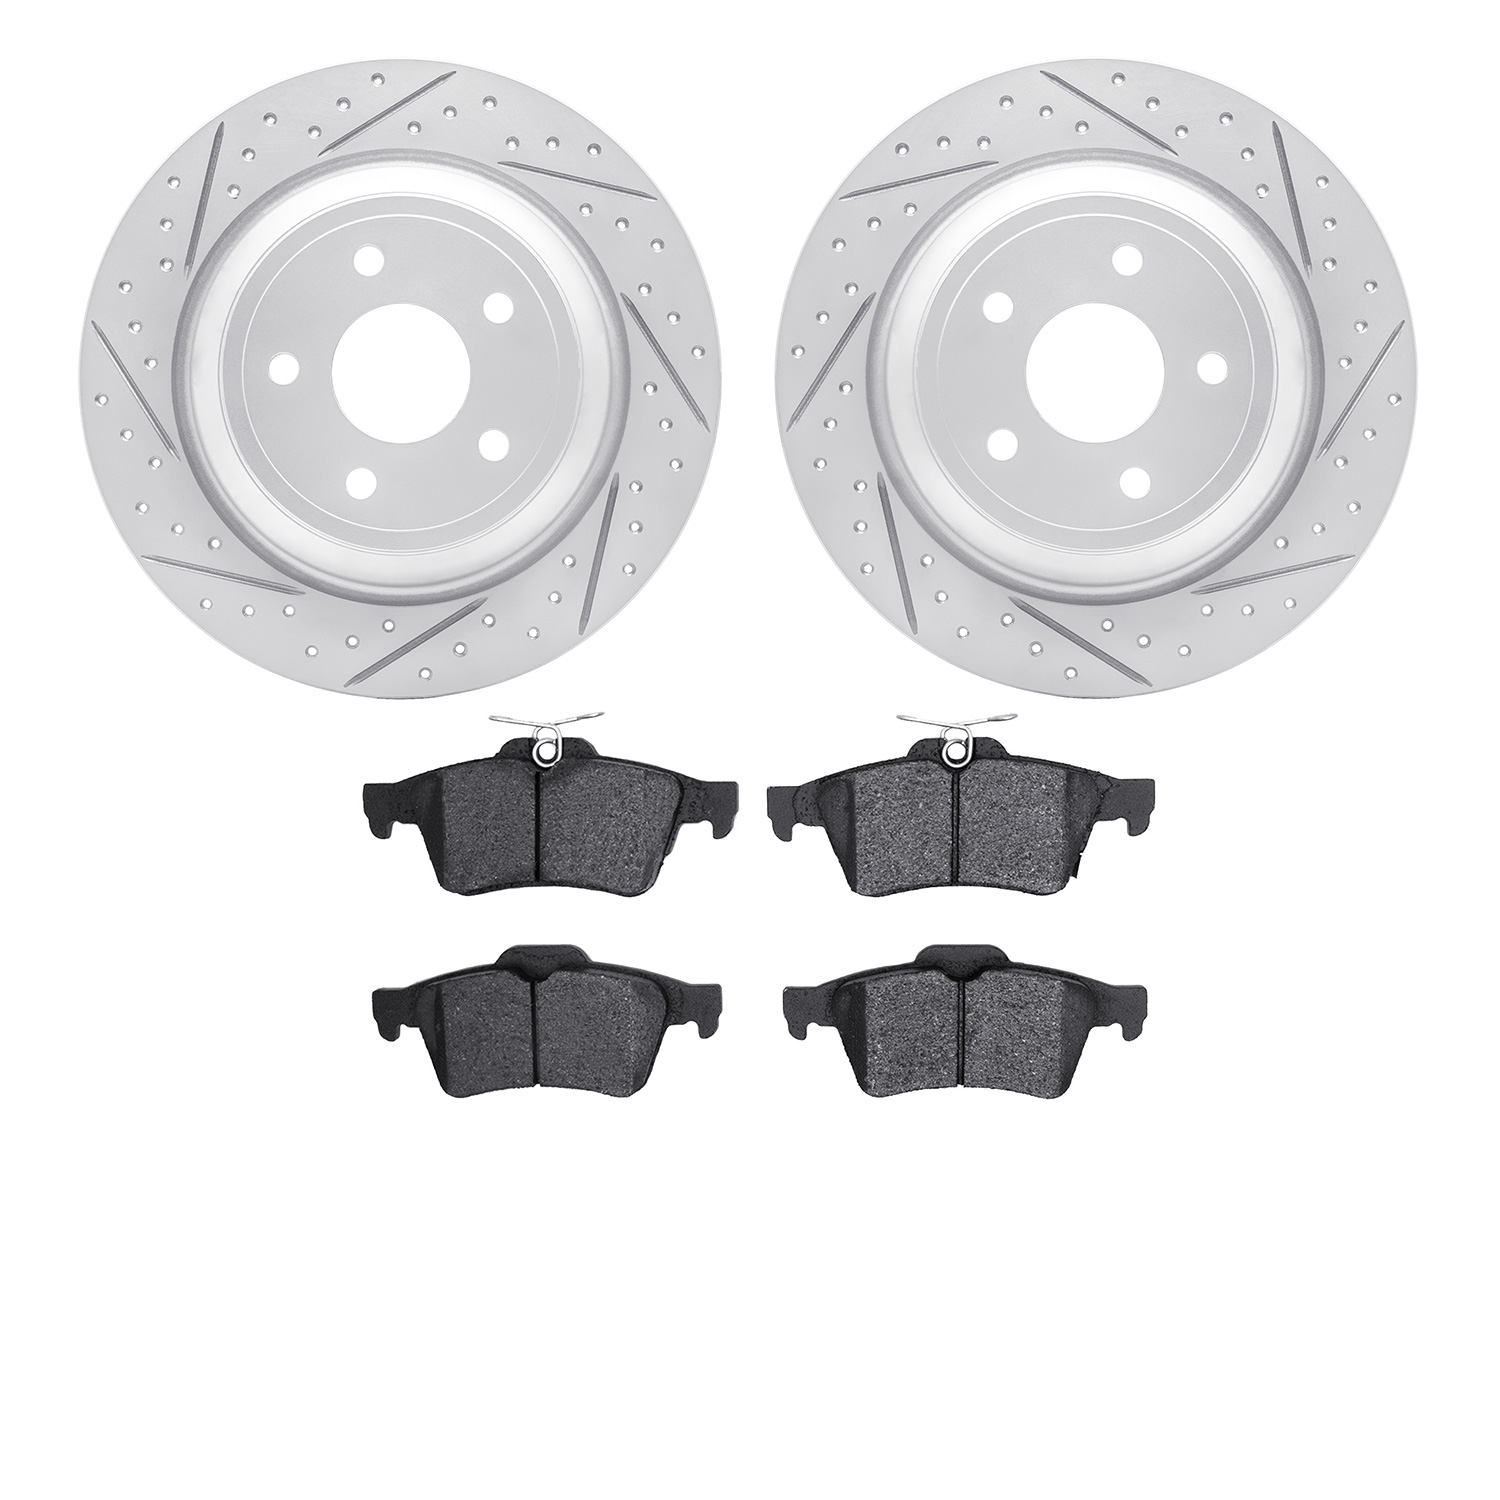 2502-54243 Geoperformance Drilled/Slotted Rotors w/5000 Advanced Brake Pads Kit, 2016-2018 Ford/Lincoln/Mercury/Mazda, Position: